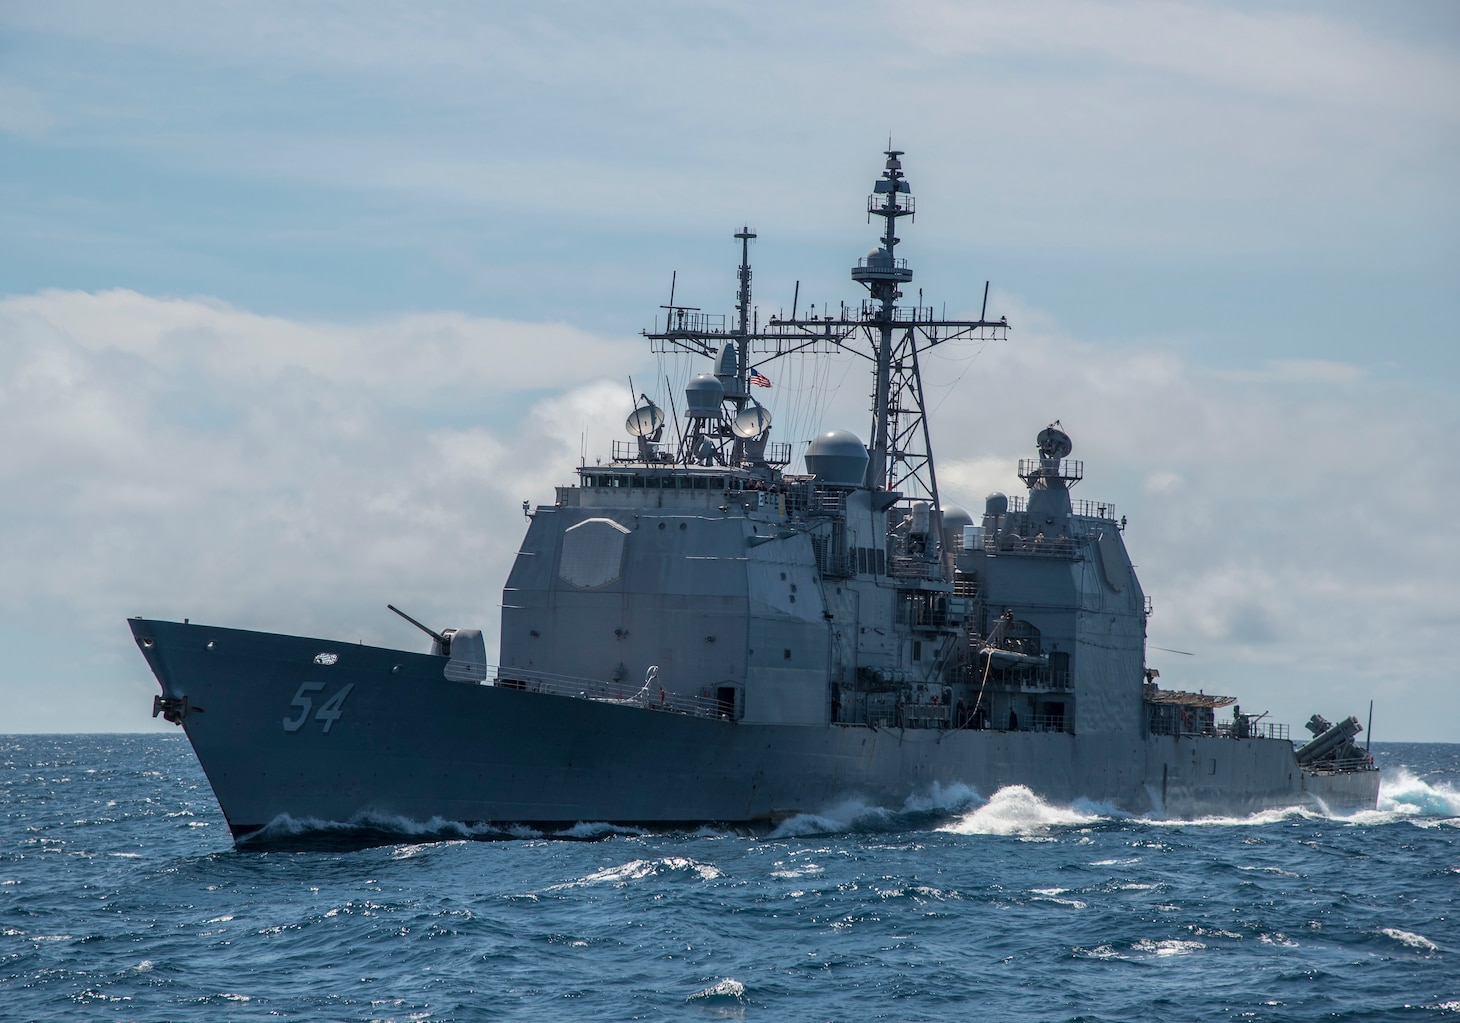 SOUTH CHINA SEA (March 06, 2016) The Ticonderoga-class guided-missile cruiser USS Antietam (CG 54) sails alongside the guided-missile destroyer USS Chung-Hoon (DDG 93). Antietam is underway in the 7th Fleet area of operations in support of security and stability in the Indo-Asia-Pacific. (U.S. Navy photo by Mass Communication Specialist 2nd Class Marcus L. Stanley/Released)